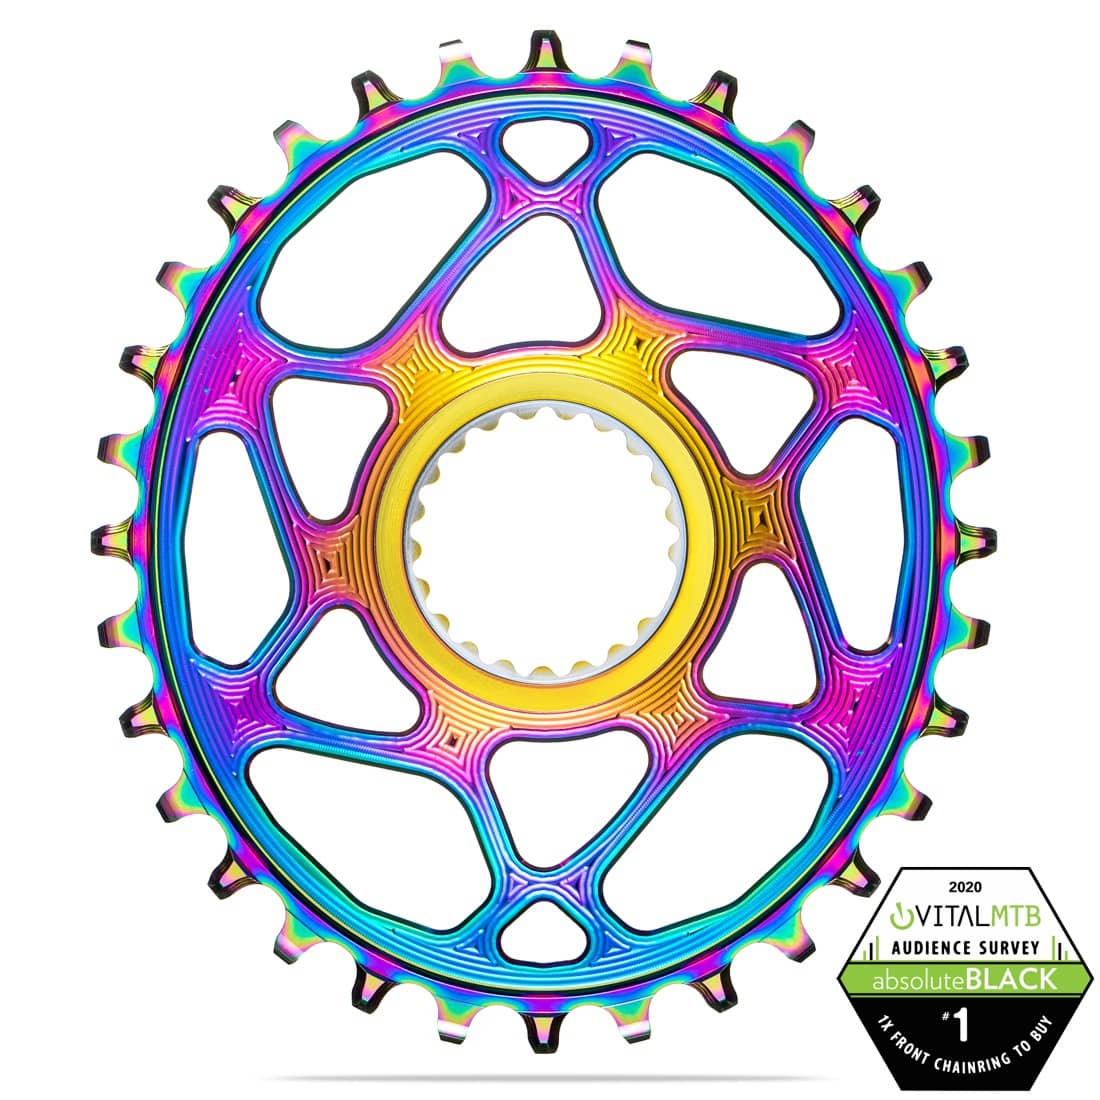 OVAL chainring for shimano 12spd cranks pvd rainbow